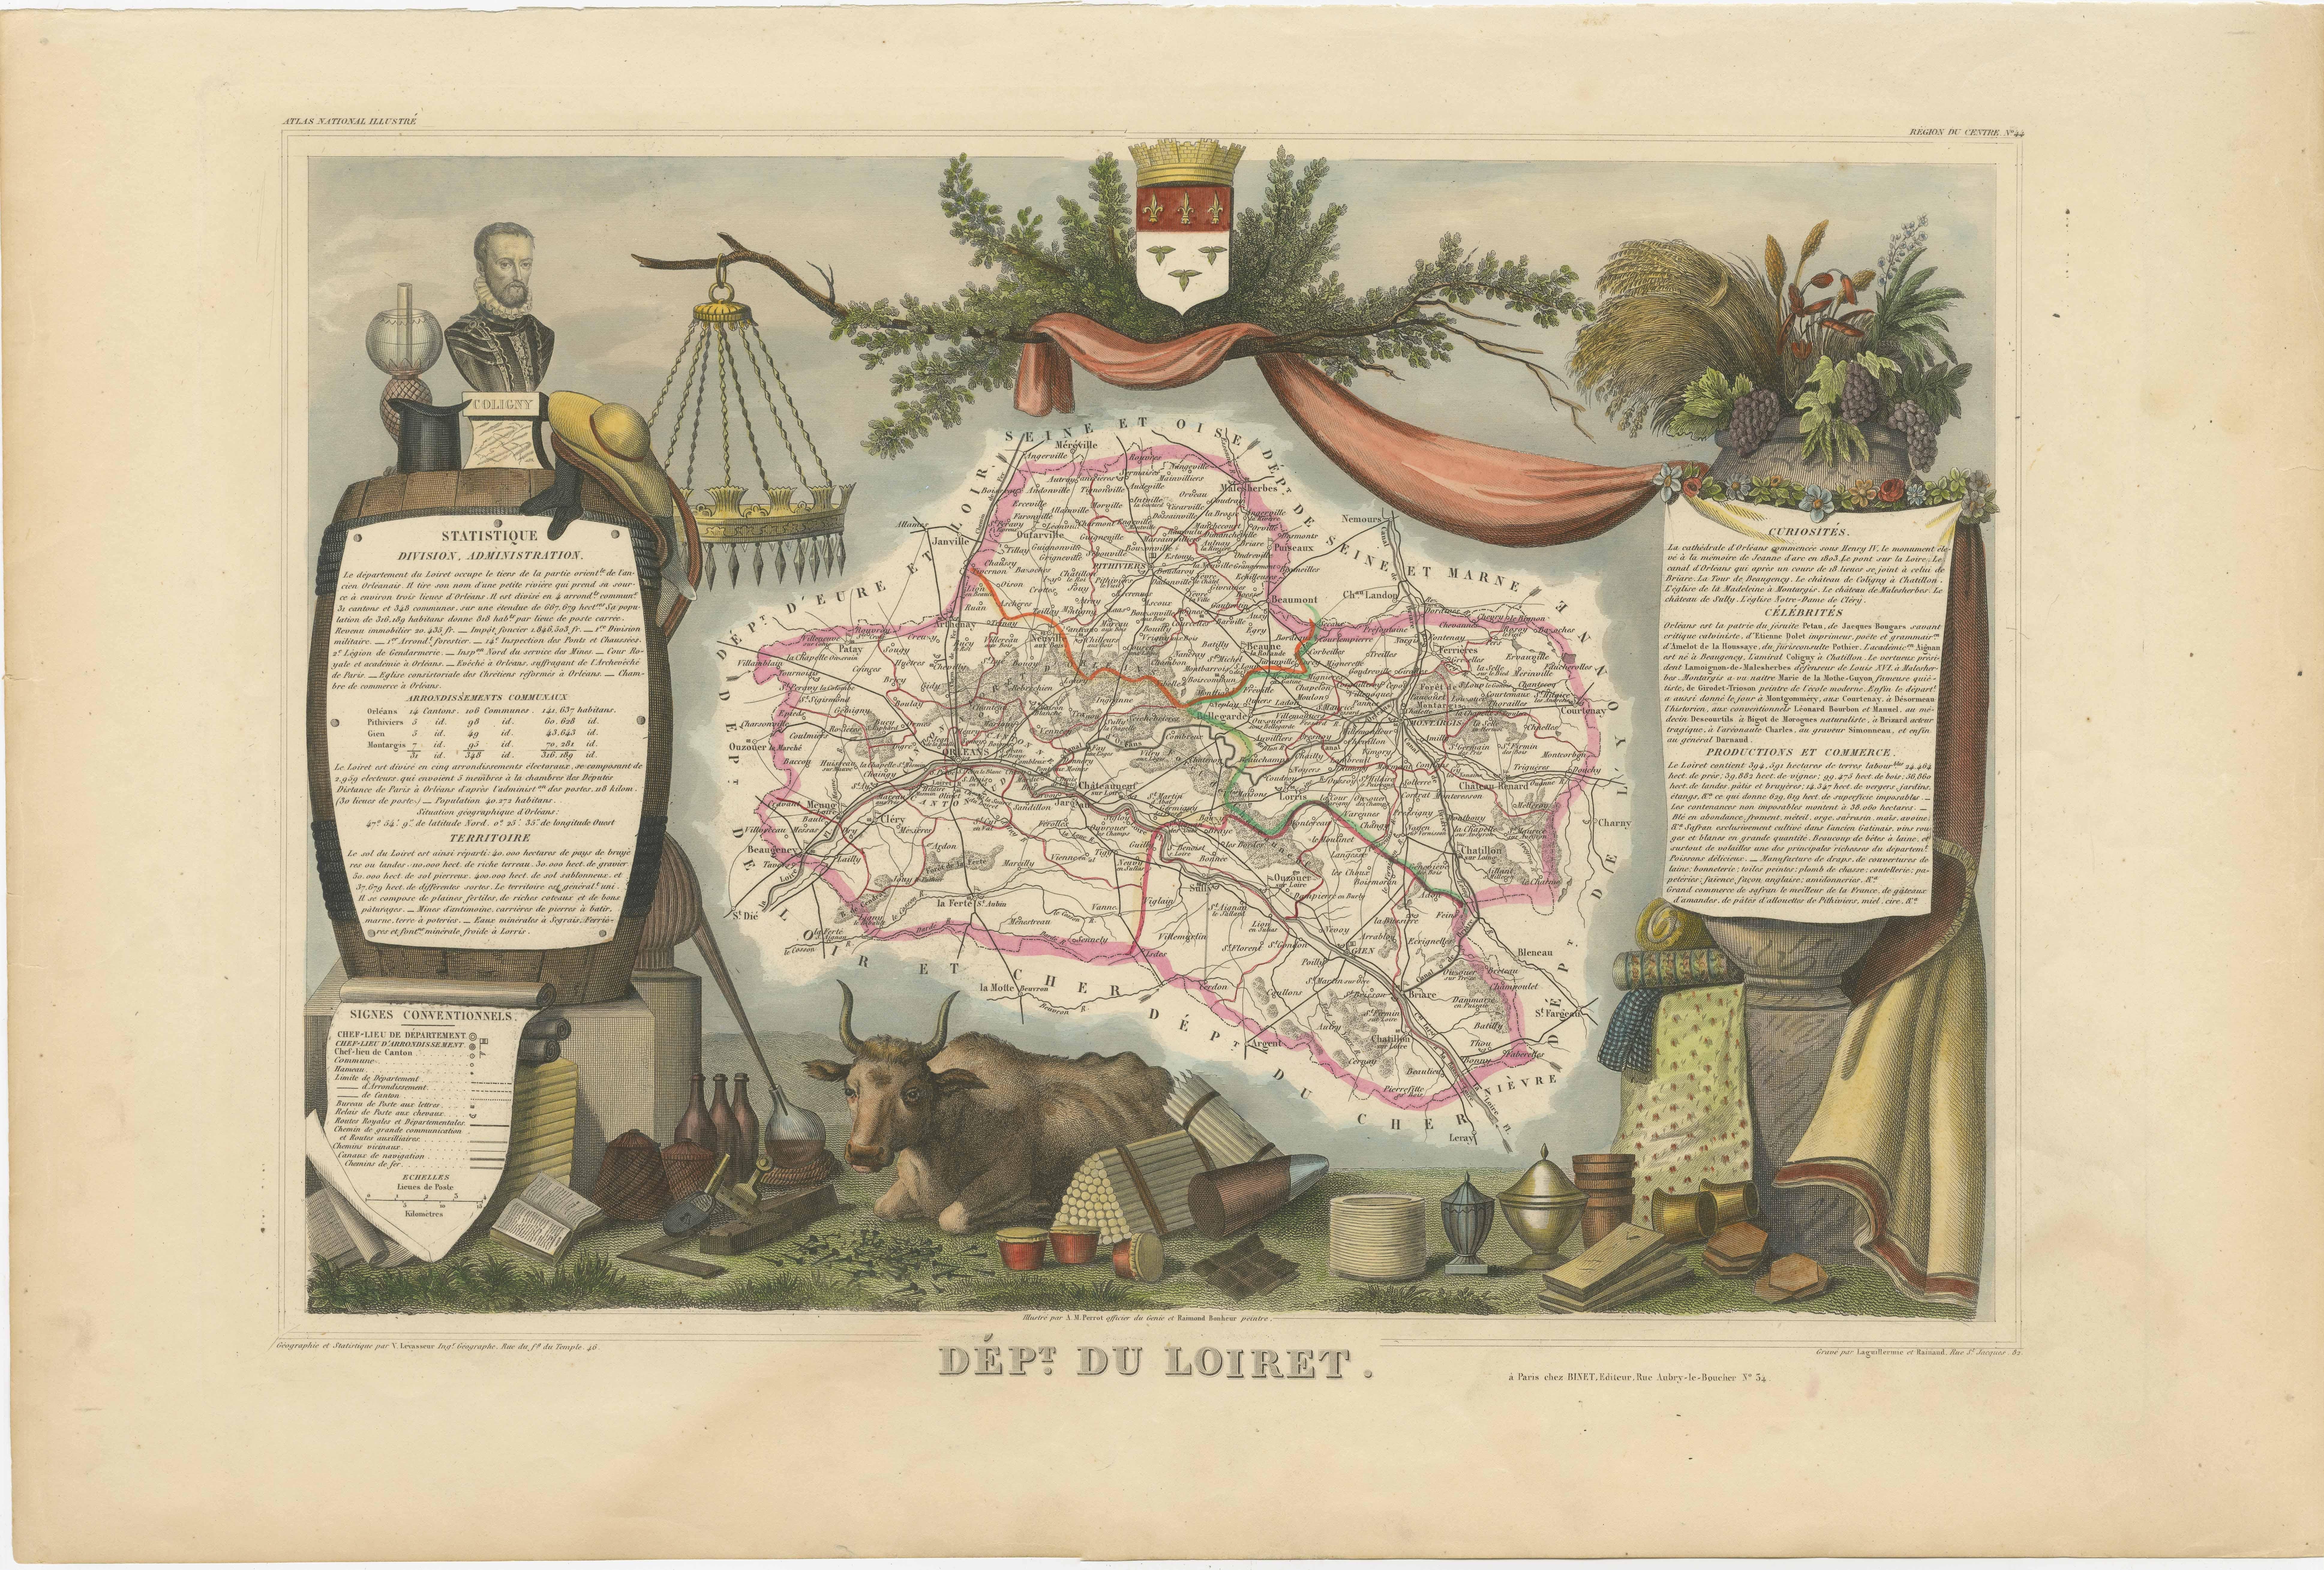 Antique map titled 'Dépt. du Loiret'. Map of the French department of Loiret, France. Surrounding the city of Orleans, Loiret is considered the heart of France and is a registered Unesco World Heritage Site. This area of France is also part of the